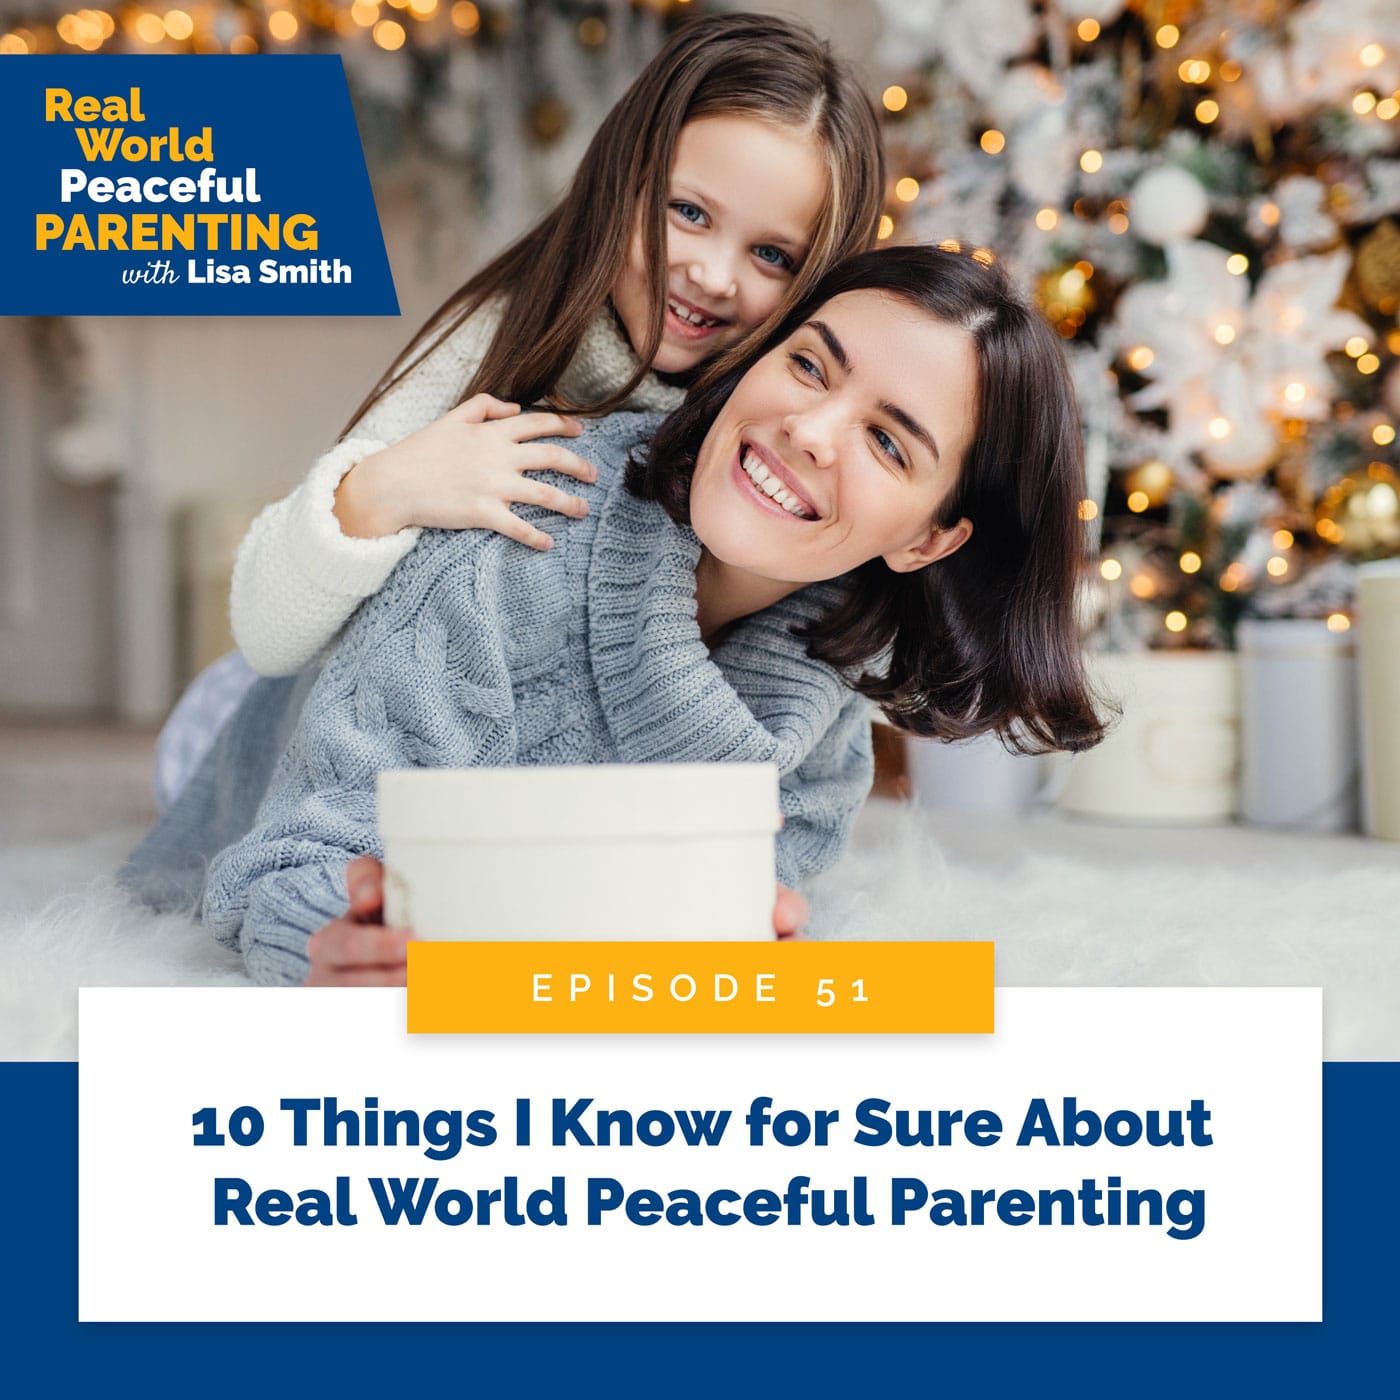 Real World Peaceful Parenting with Lisa Smith | 10 Things I Know for Sure About Real World Peaceful Parenting